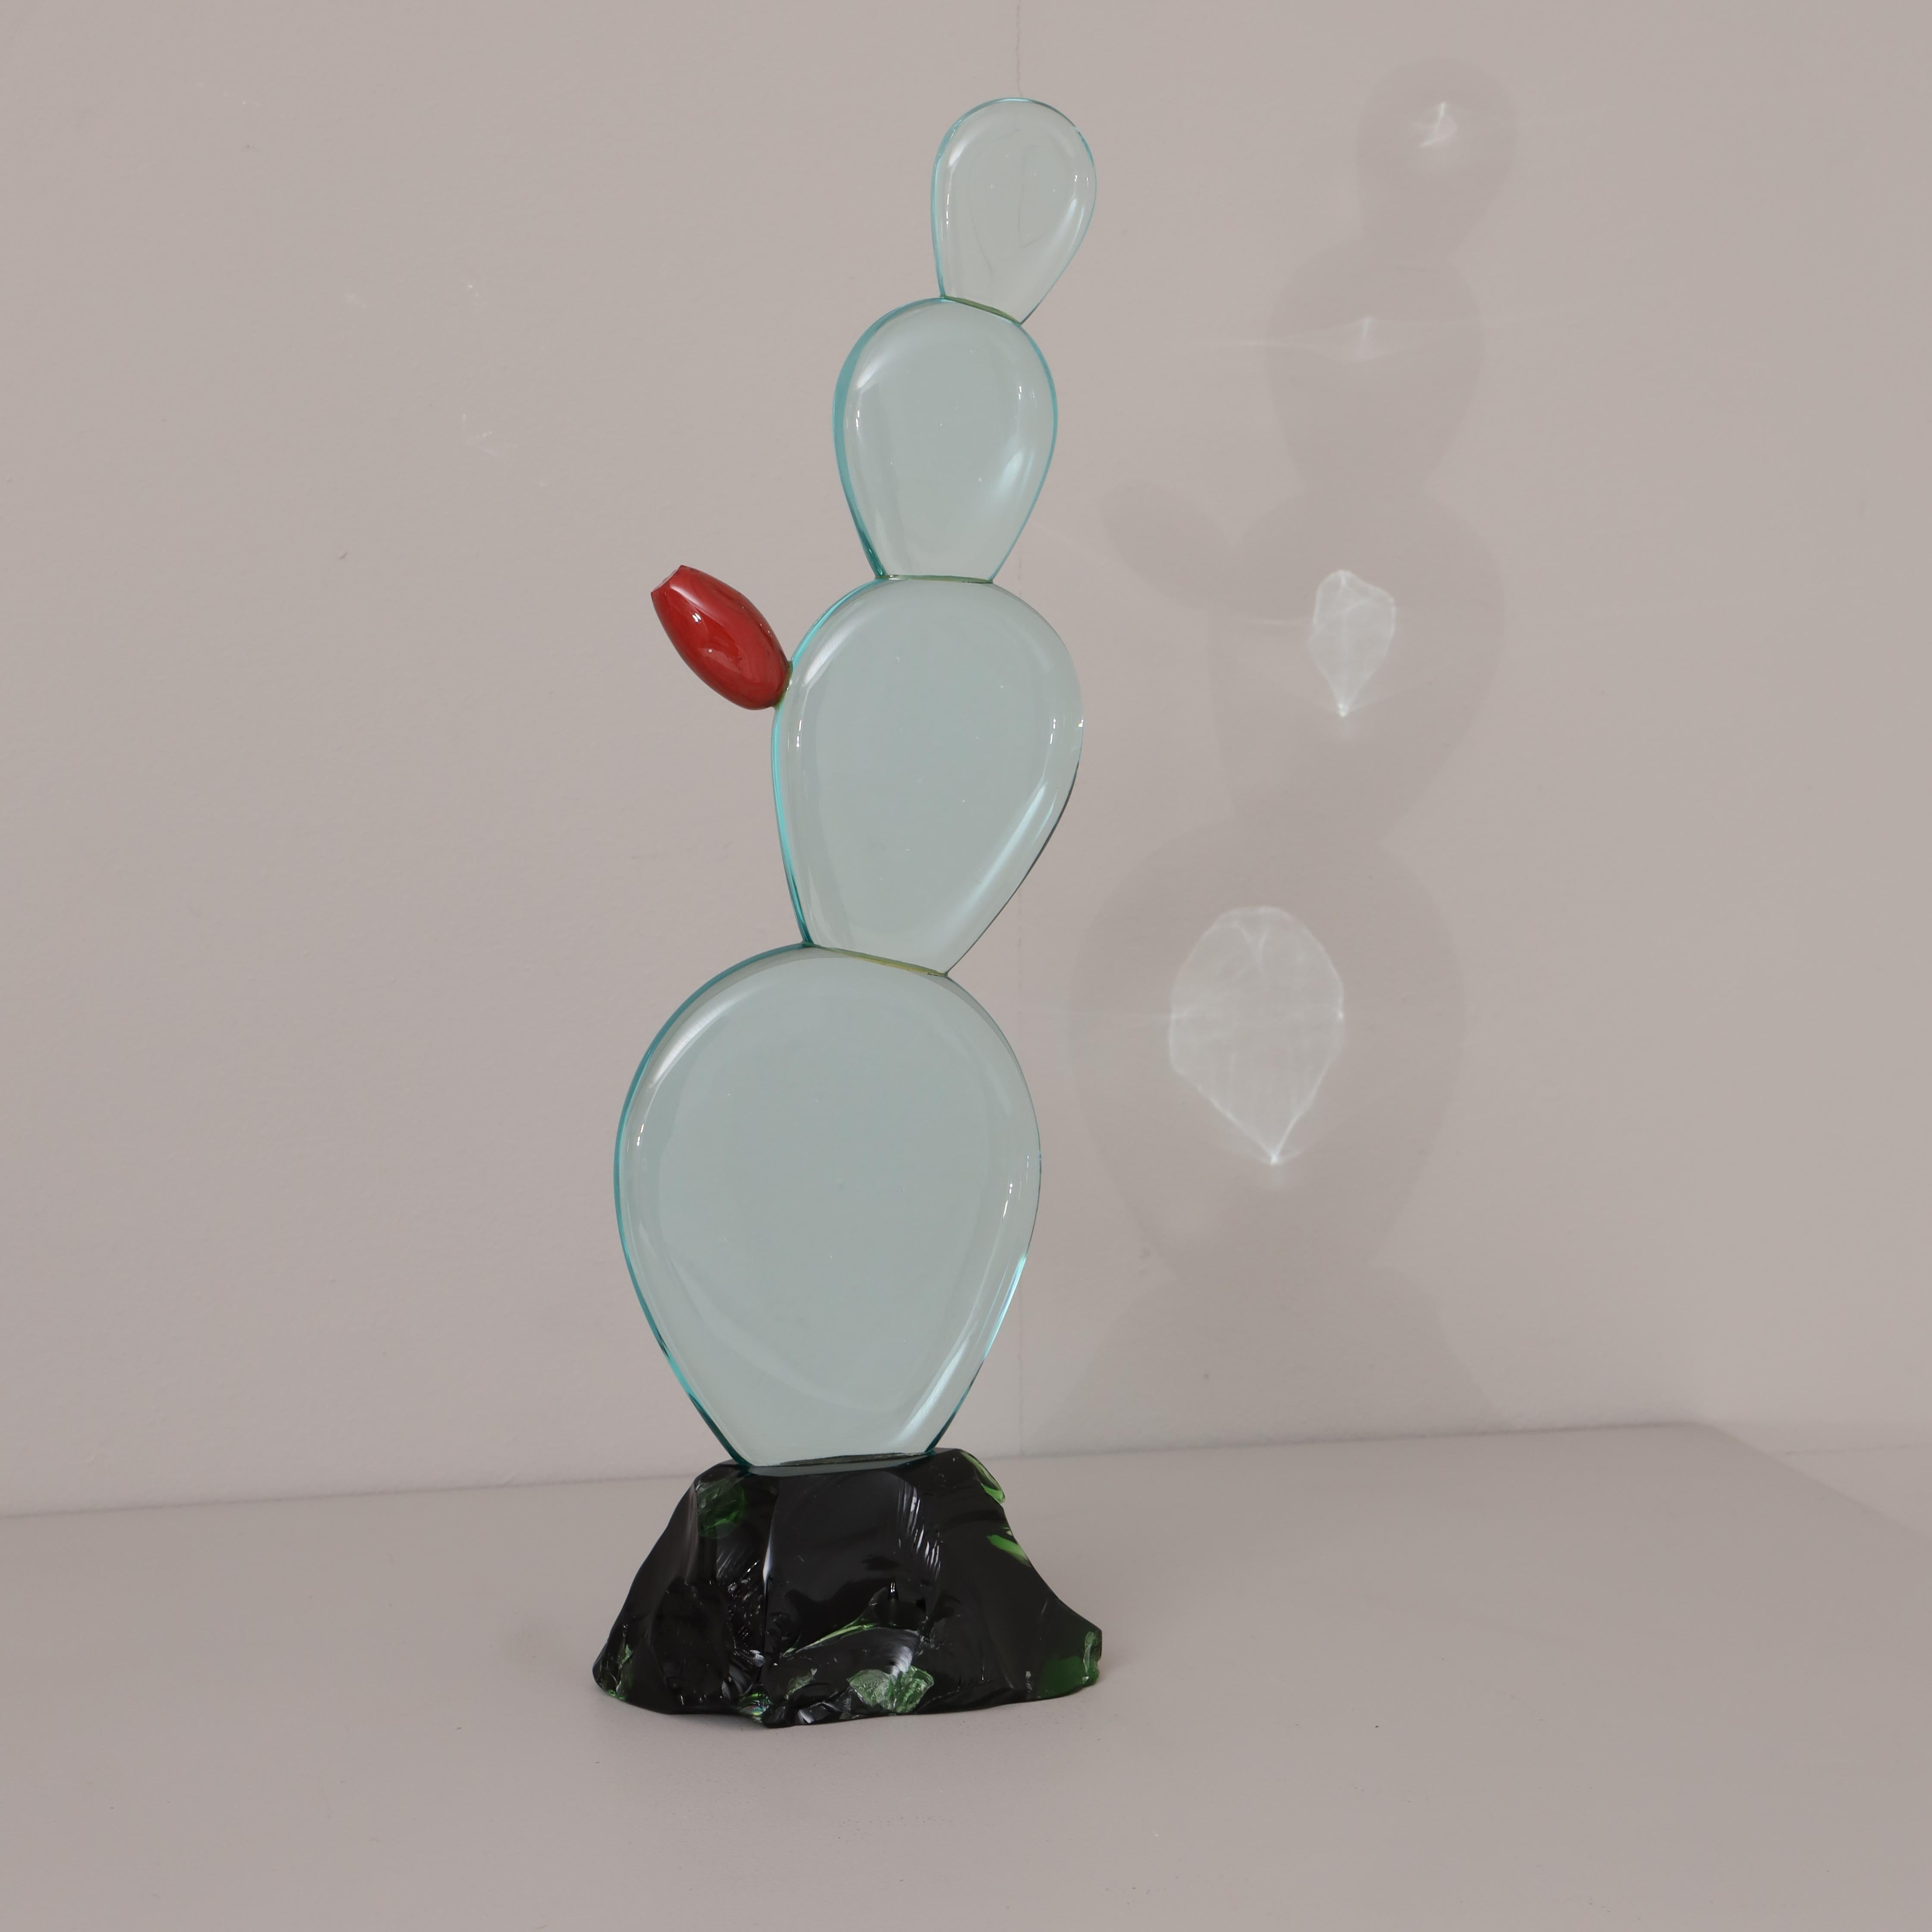 Abstract Italian Art Glass Sculpture For Sale 1